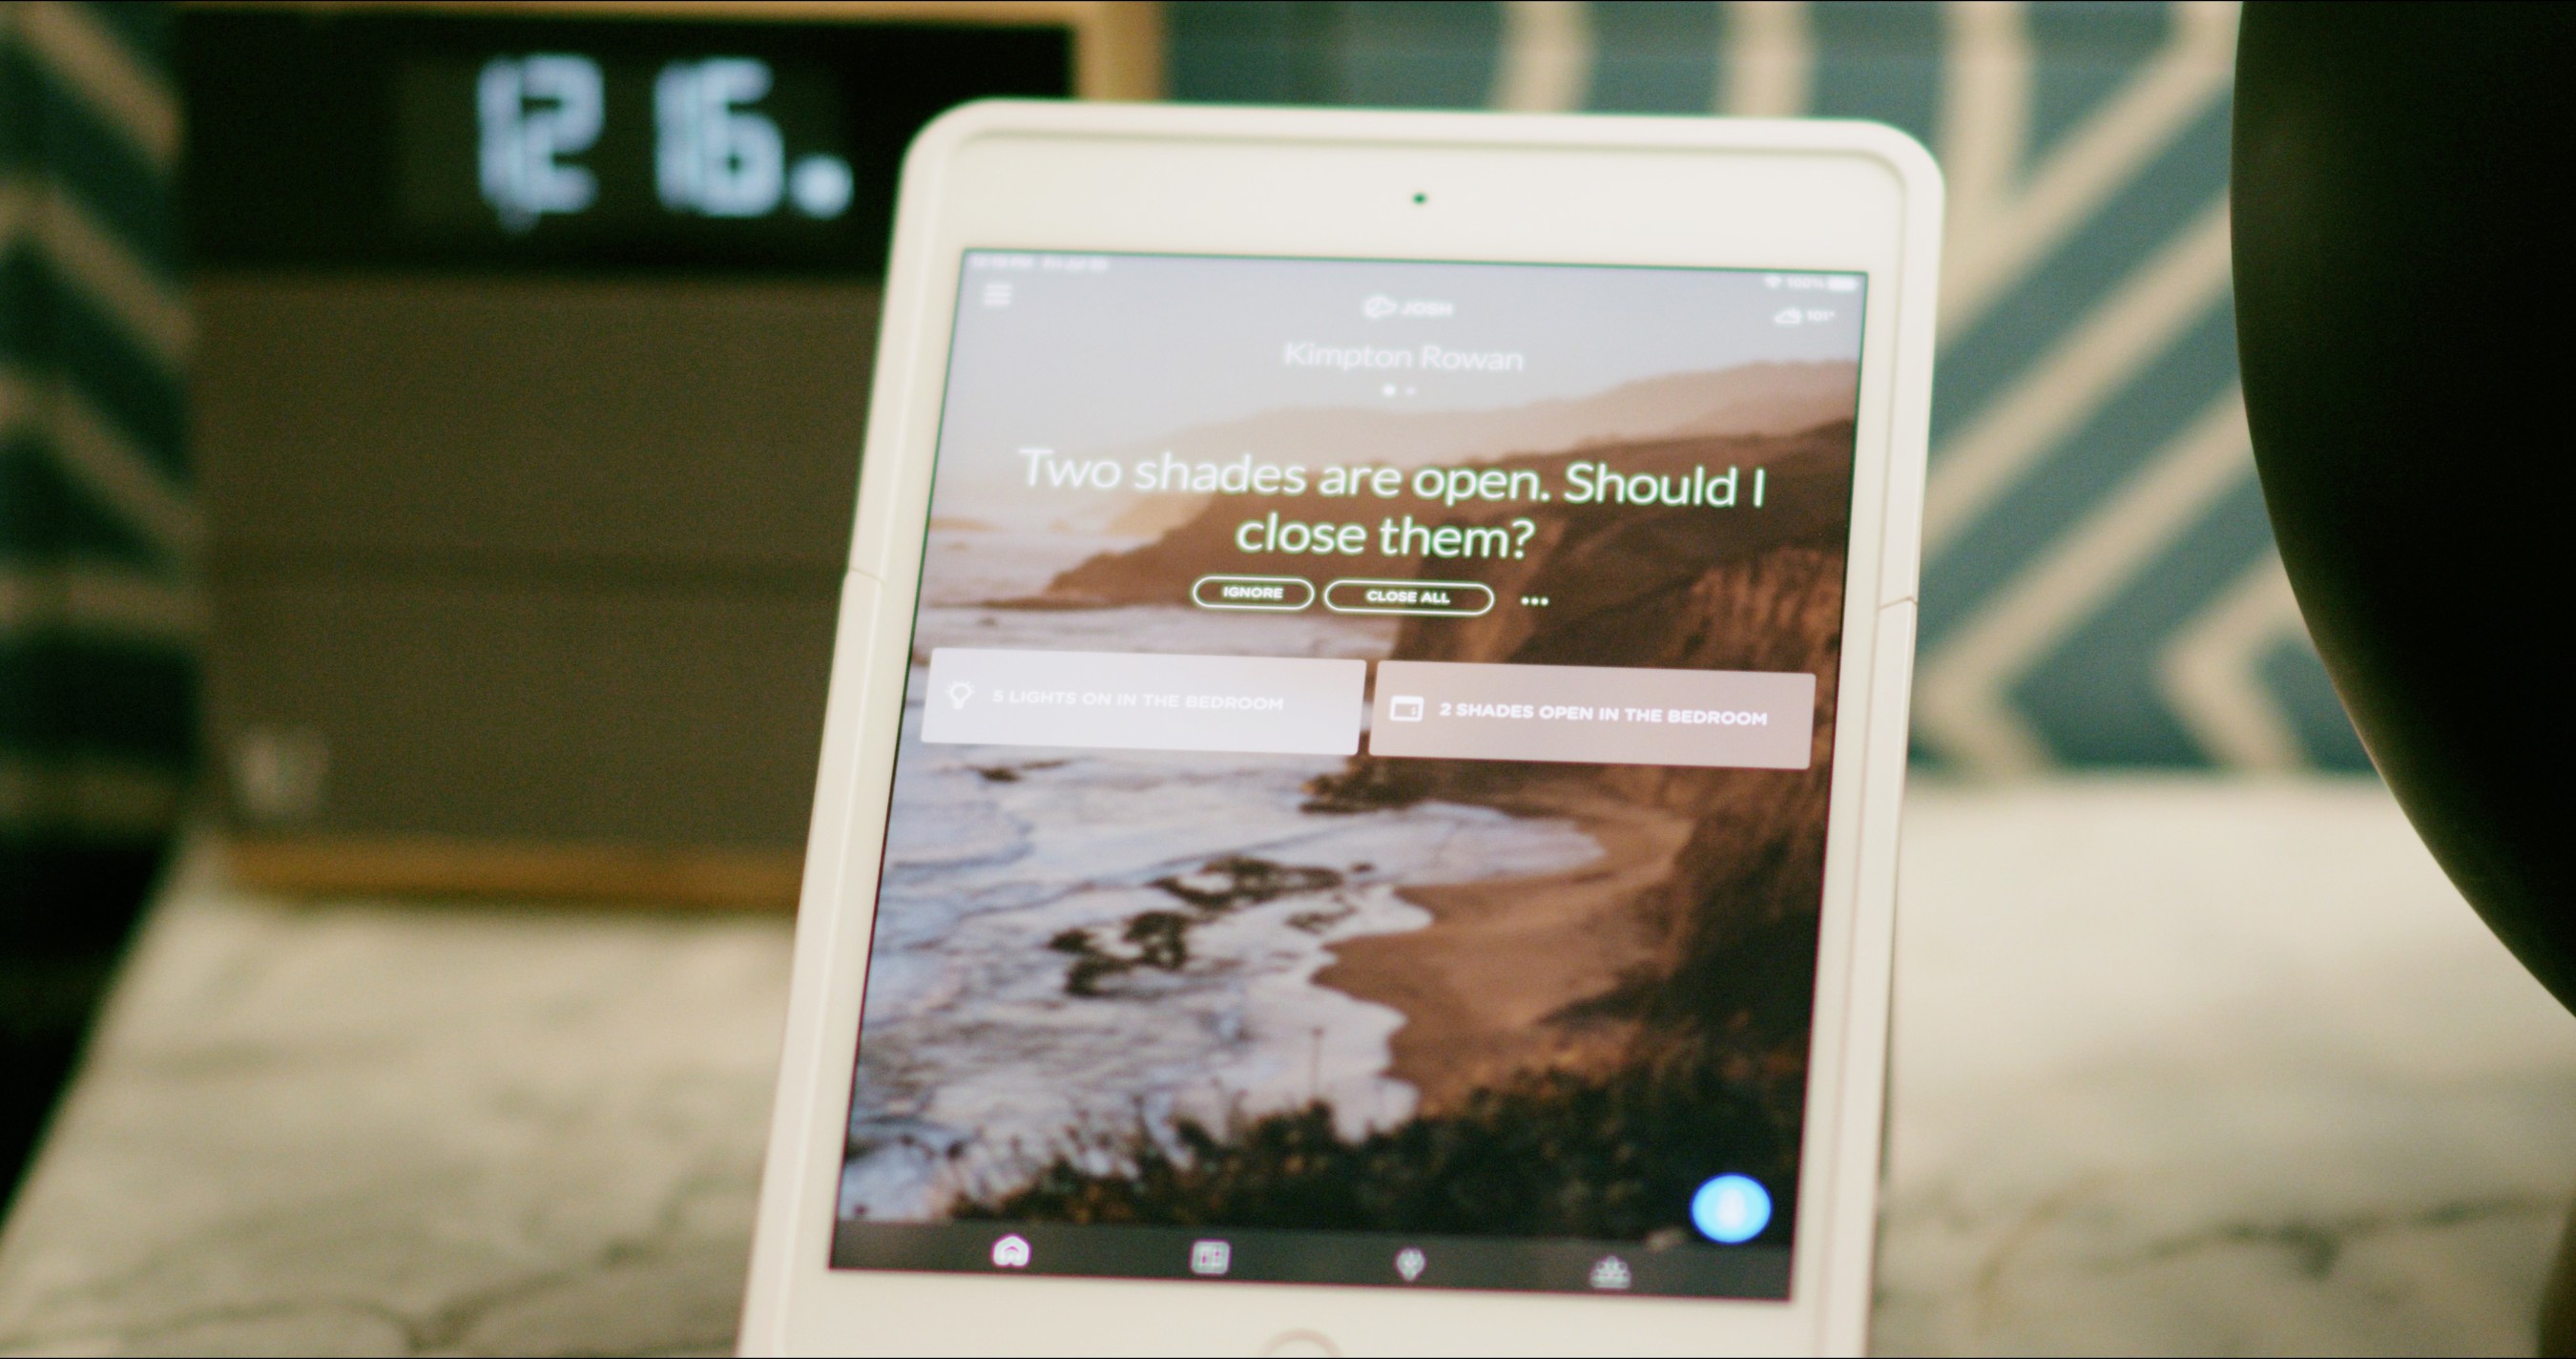 IHG Hotels & Resorts gives Kimpton Rowan guests unlimited control of the room through voice command and the Josh App